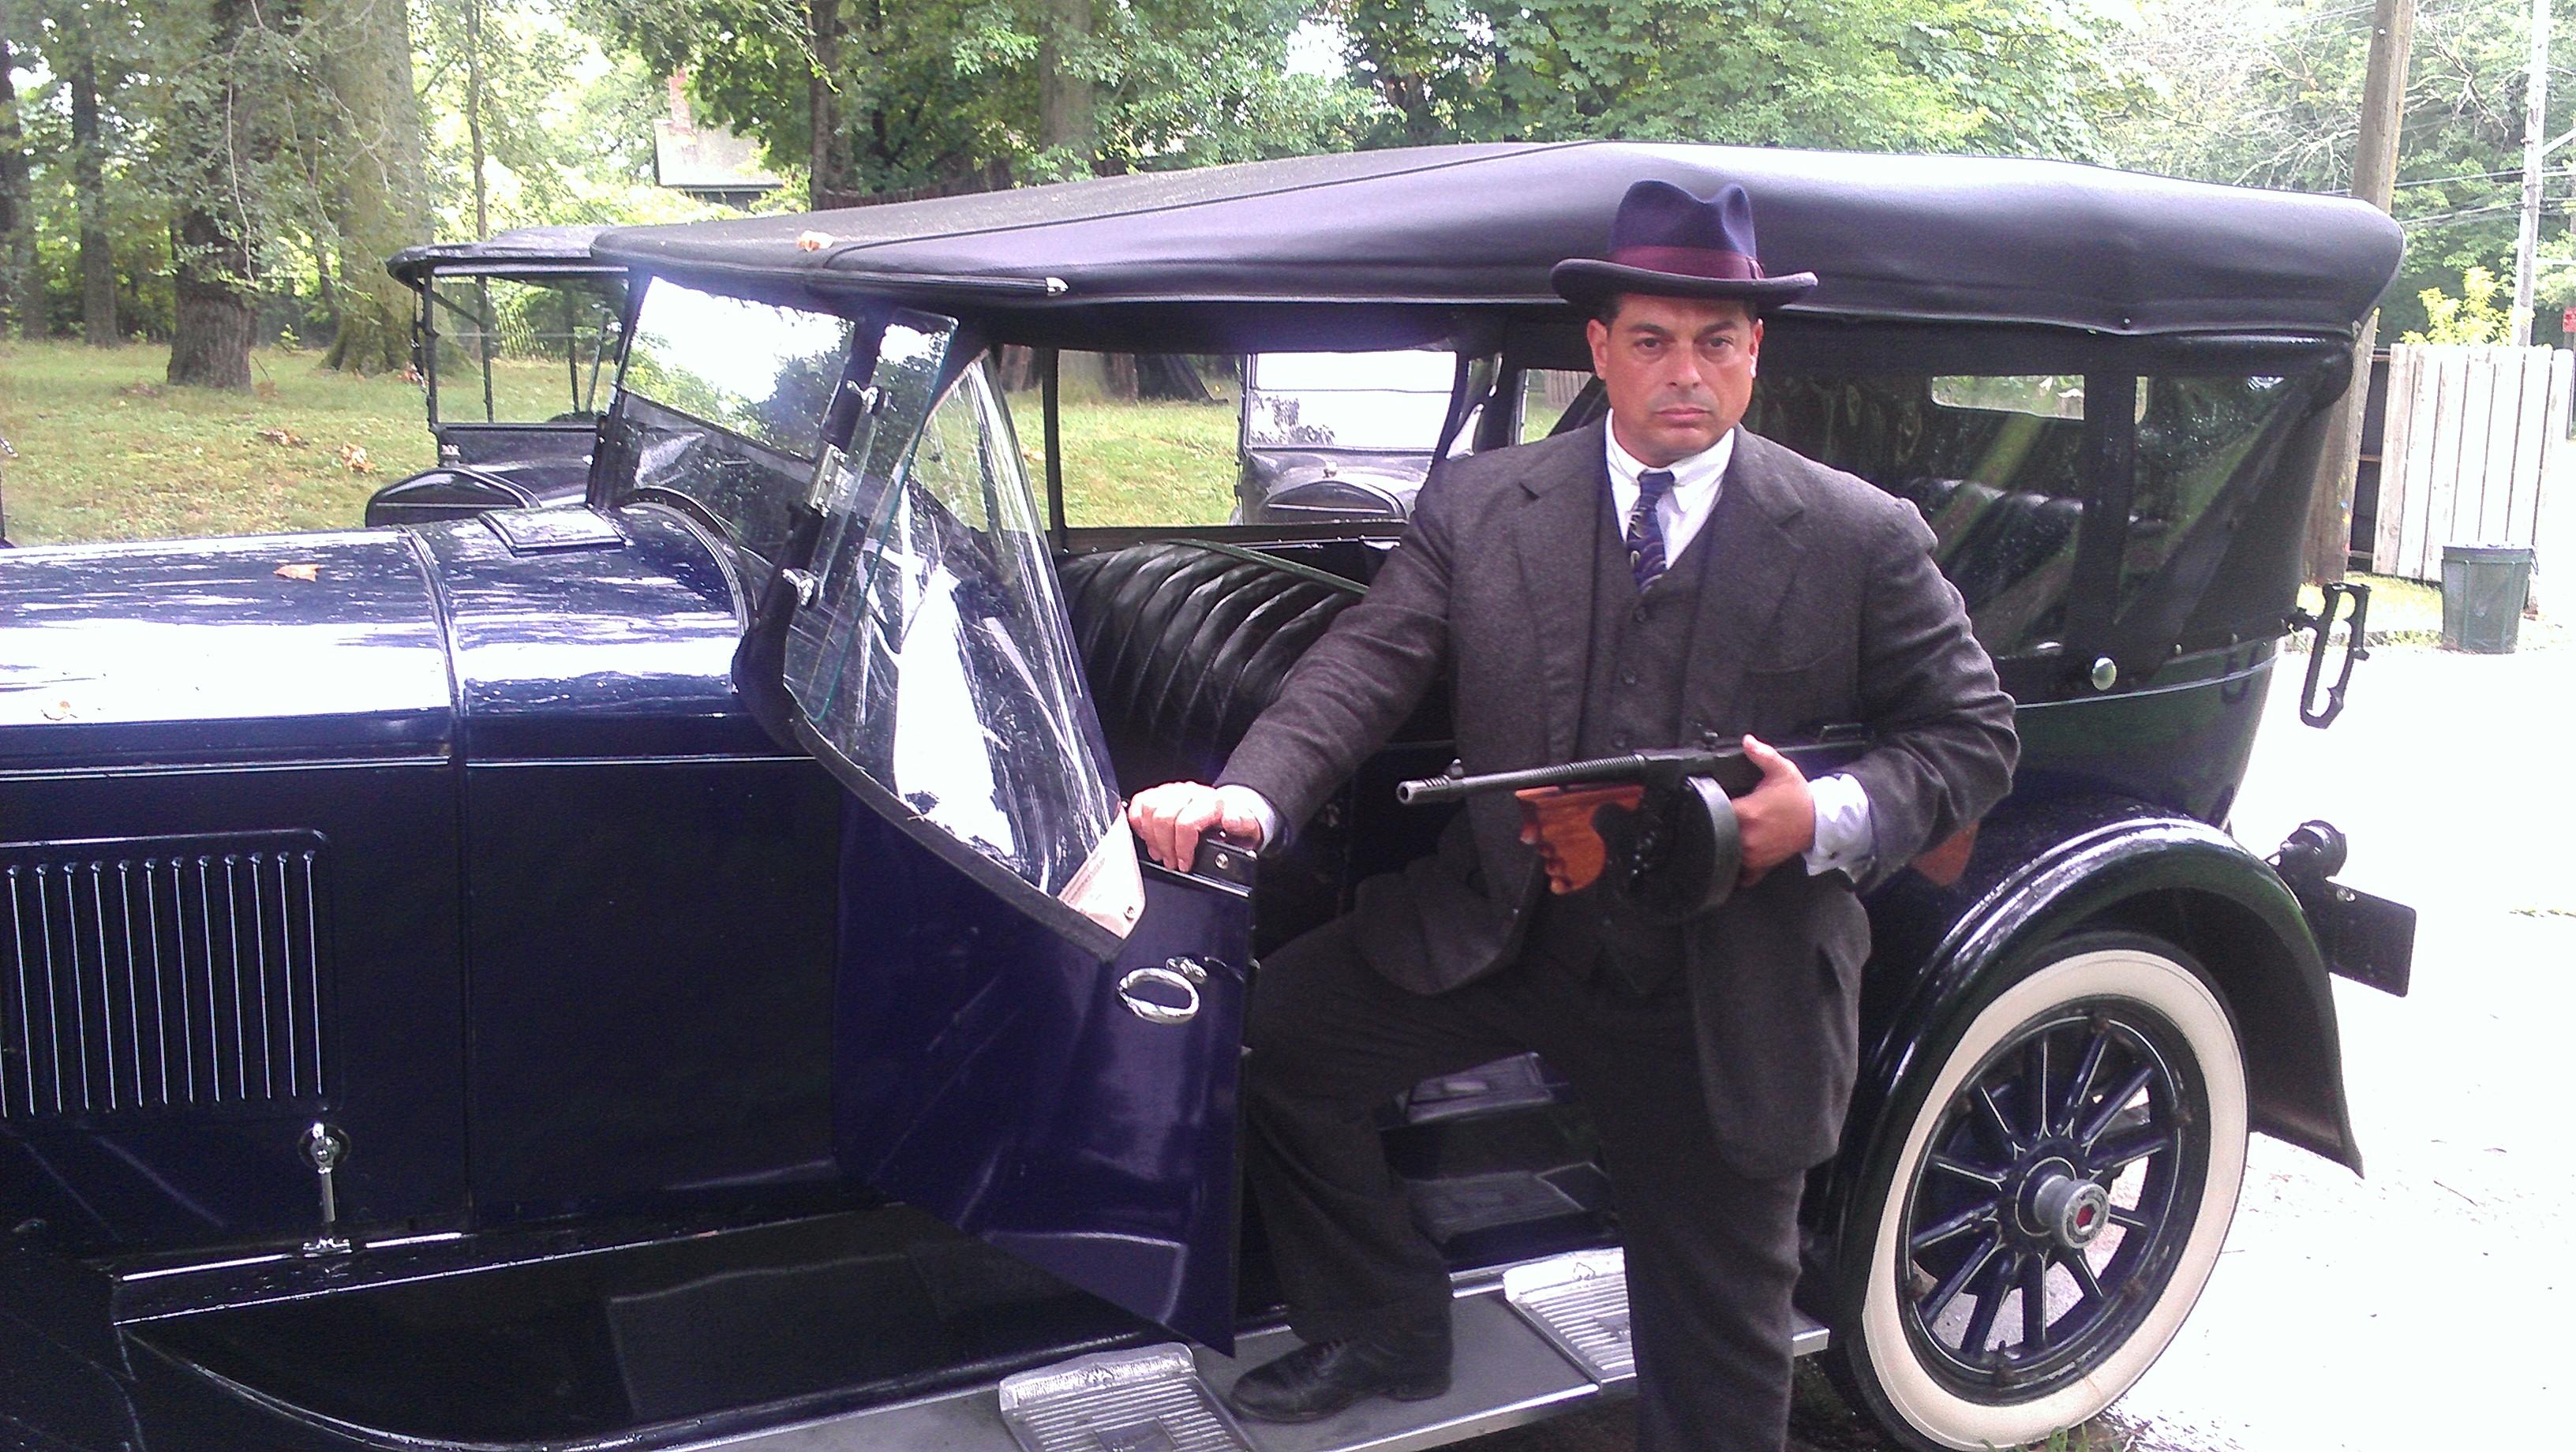 Rocco Parente Jr as Falcone in the hit series Boardwalk Empire on HBO